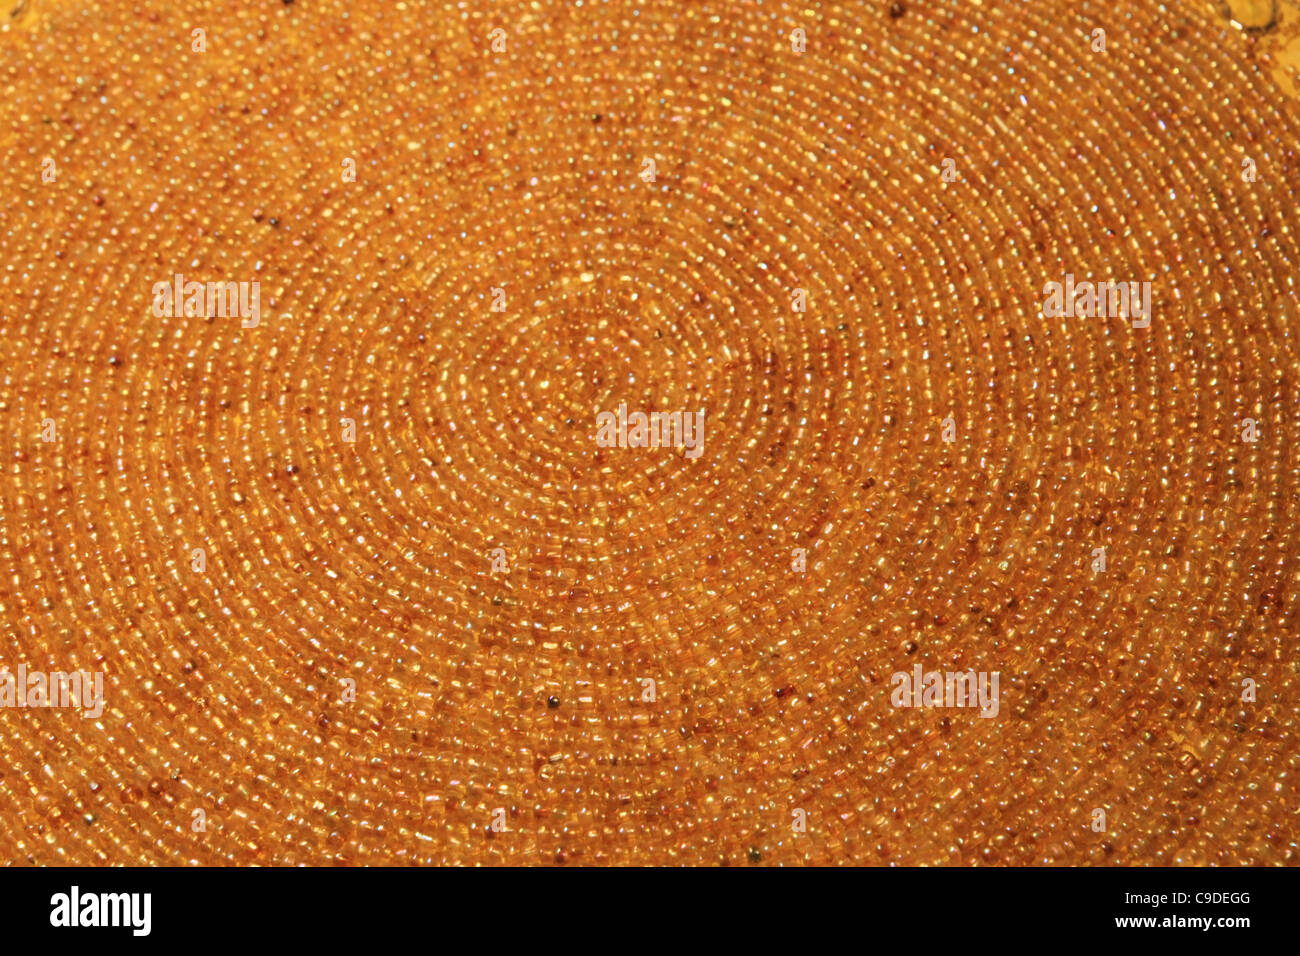 yellow spiral beadwork background with a shallow depth of field Stock Photo